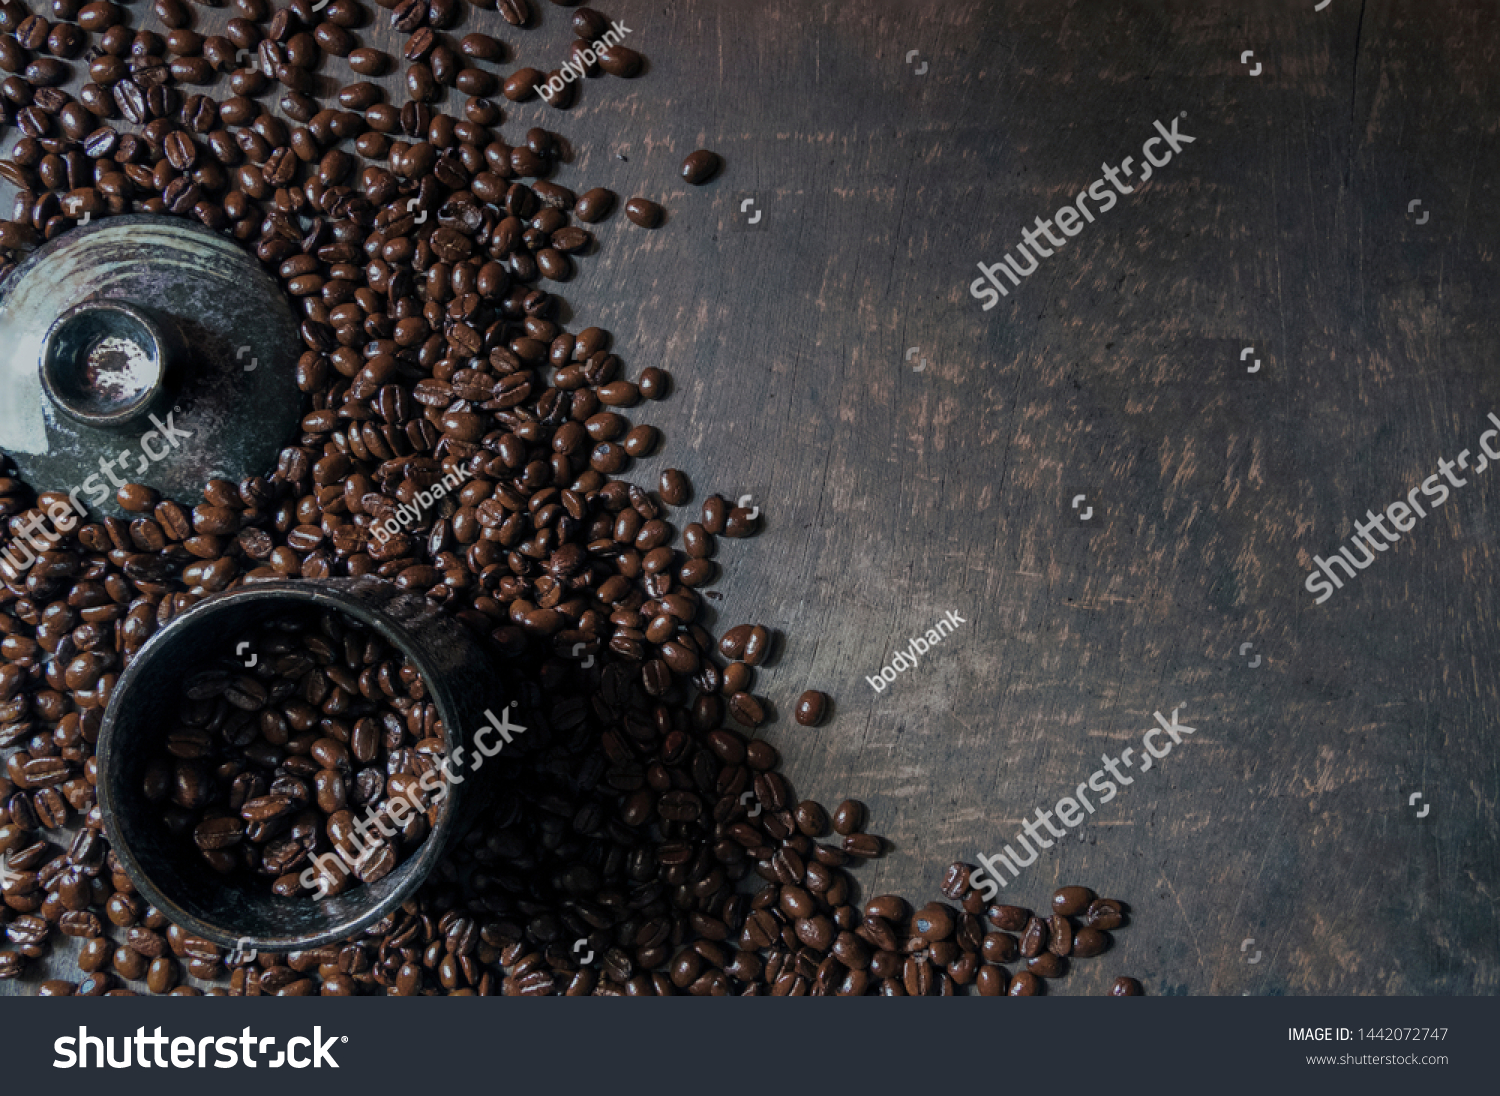 
Coffee cup and coffee beans on the wooden floor. Top view with copy space for your text #1442072747